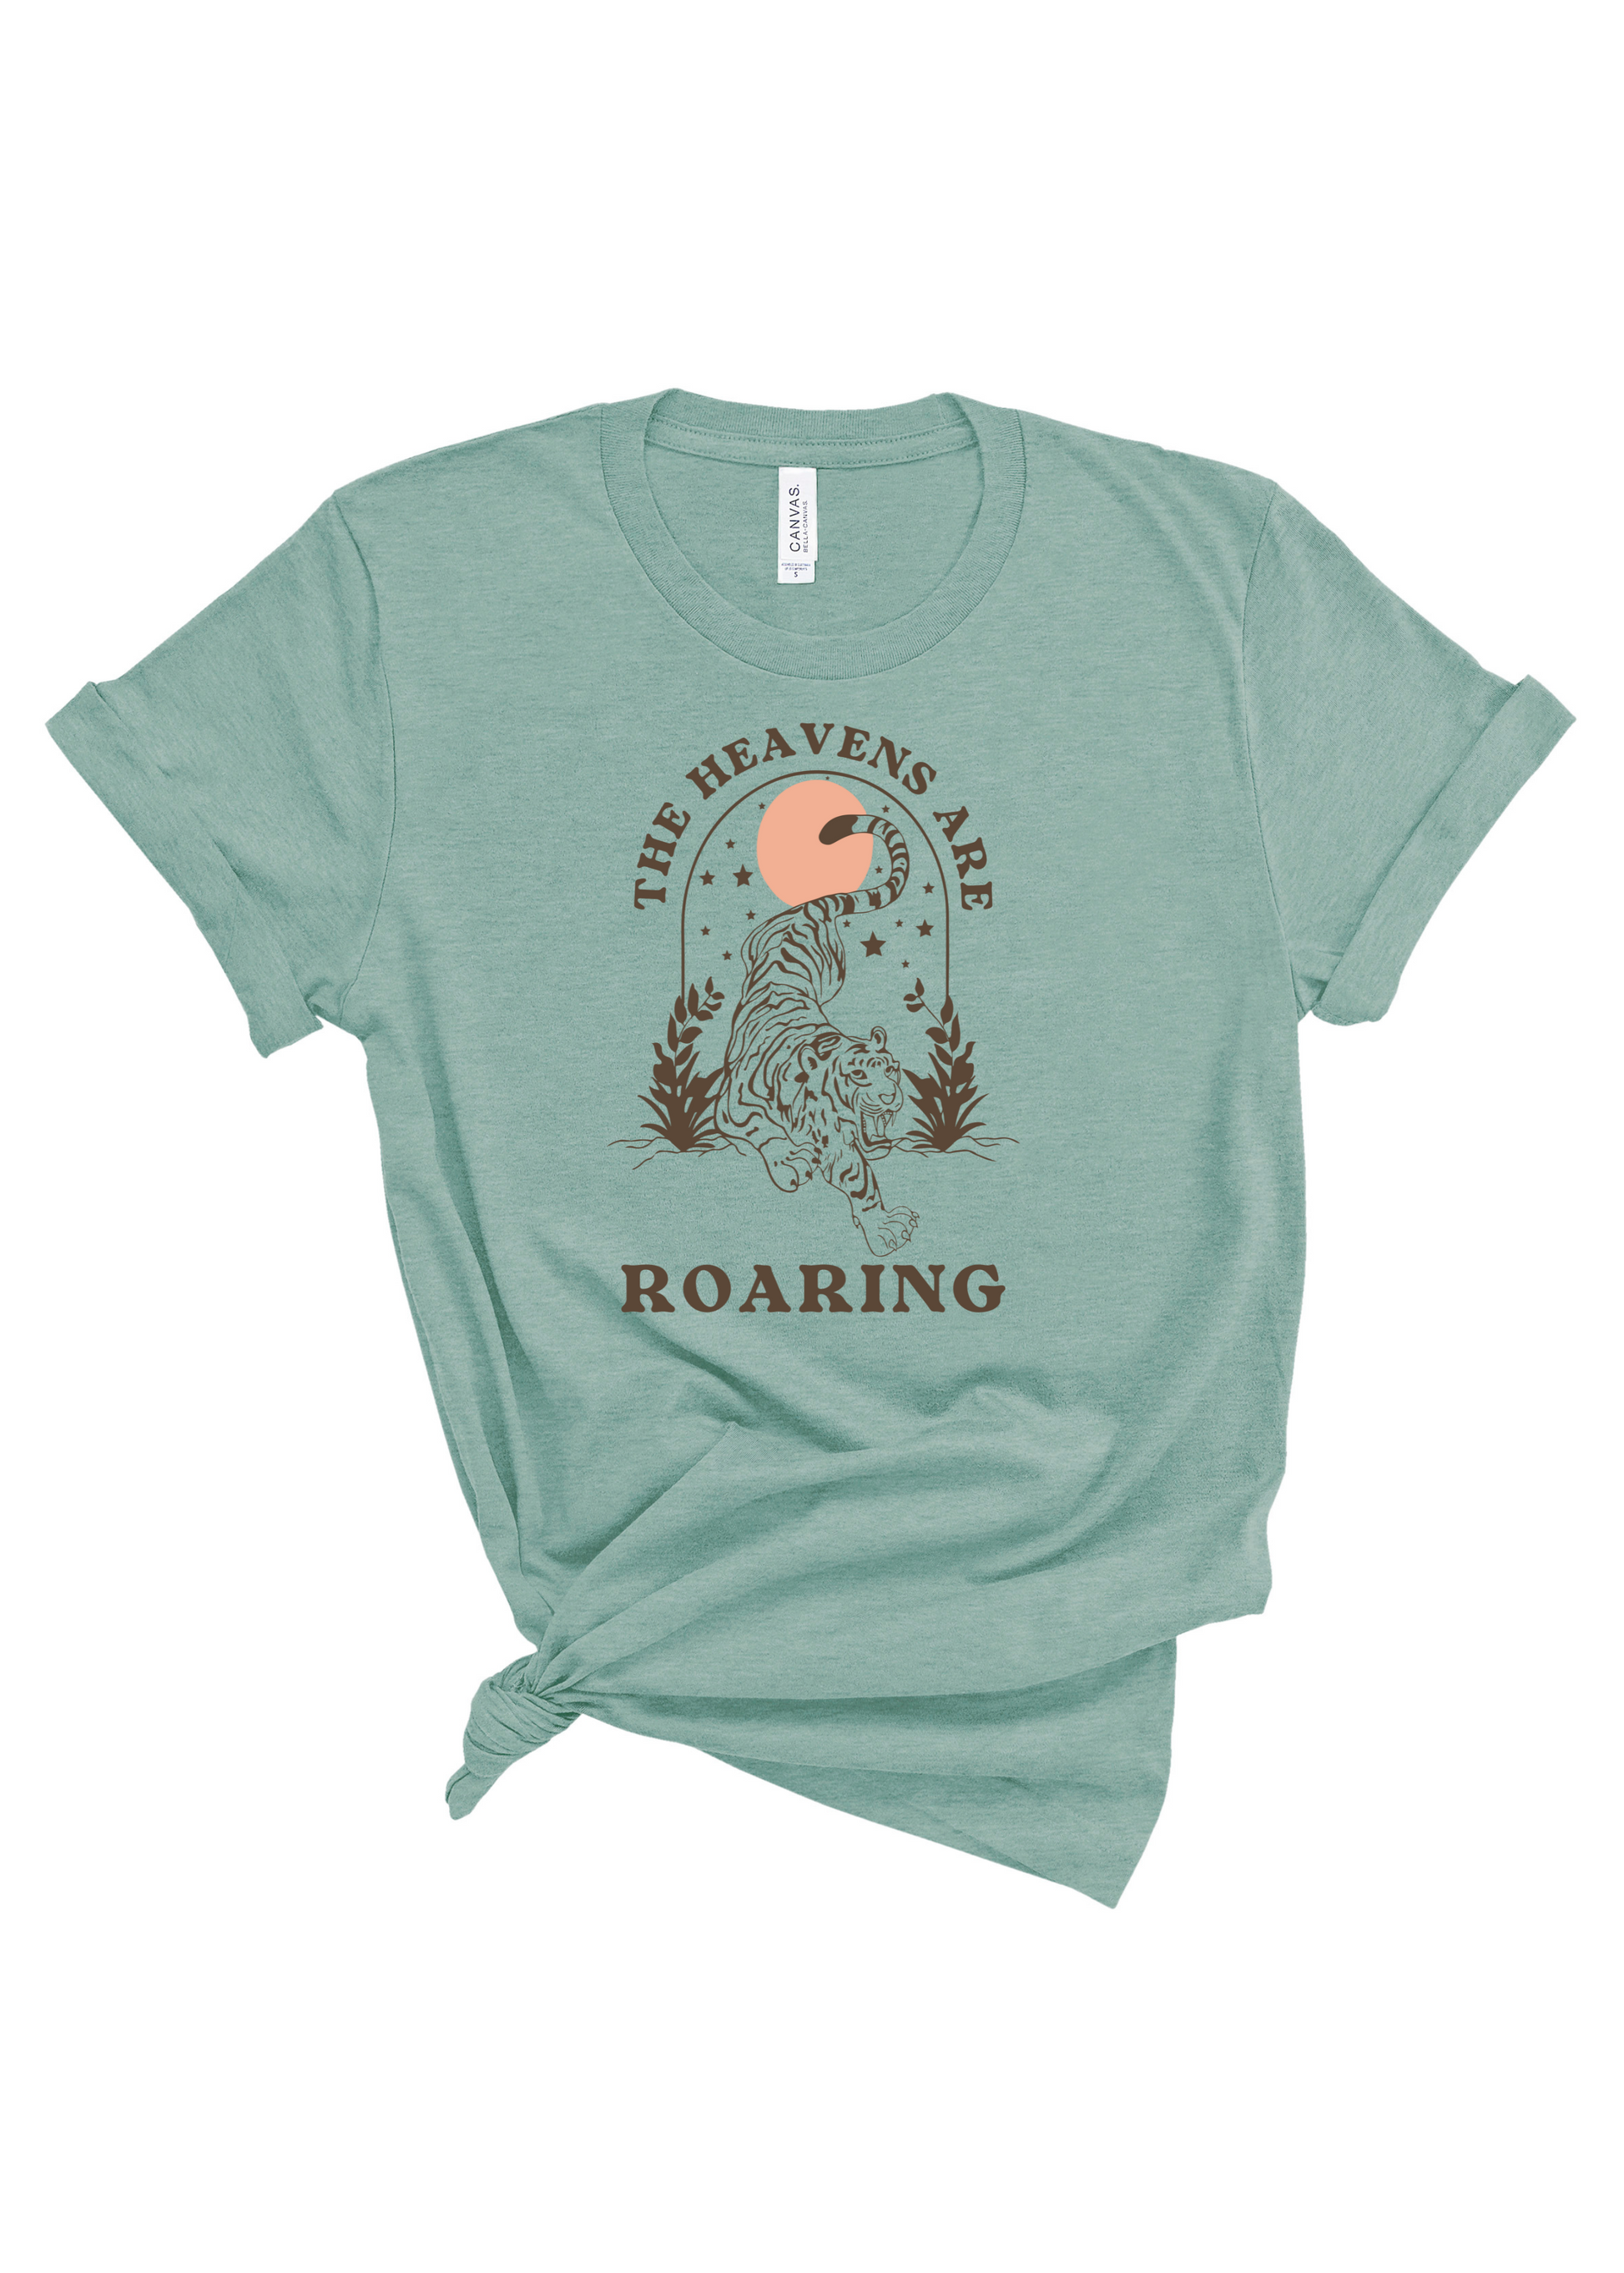 Heavens are Roaring | Adult Tee | RTS-Sister Shirts-Sister Shirts, Cute & Custom Tees for Mama & Littles in Trussville, Alabama.